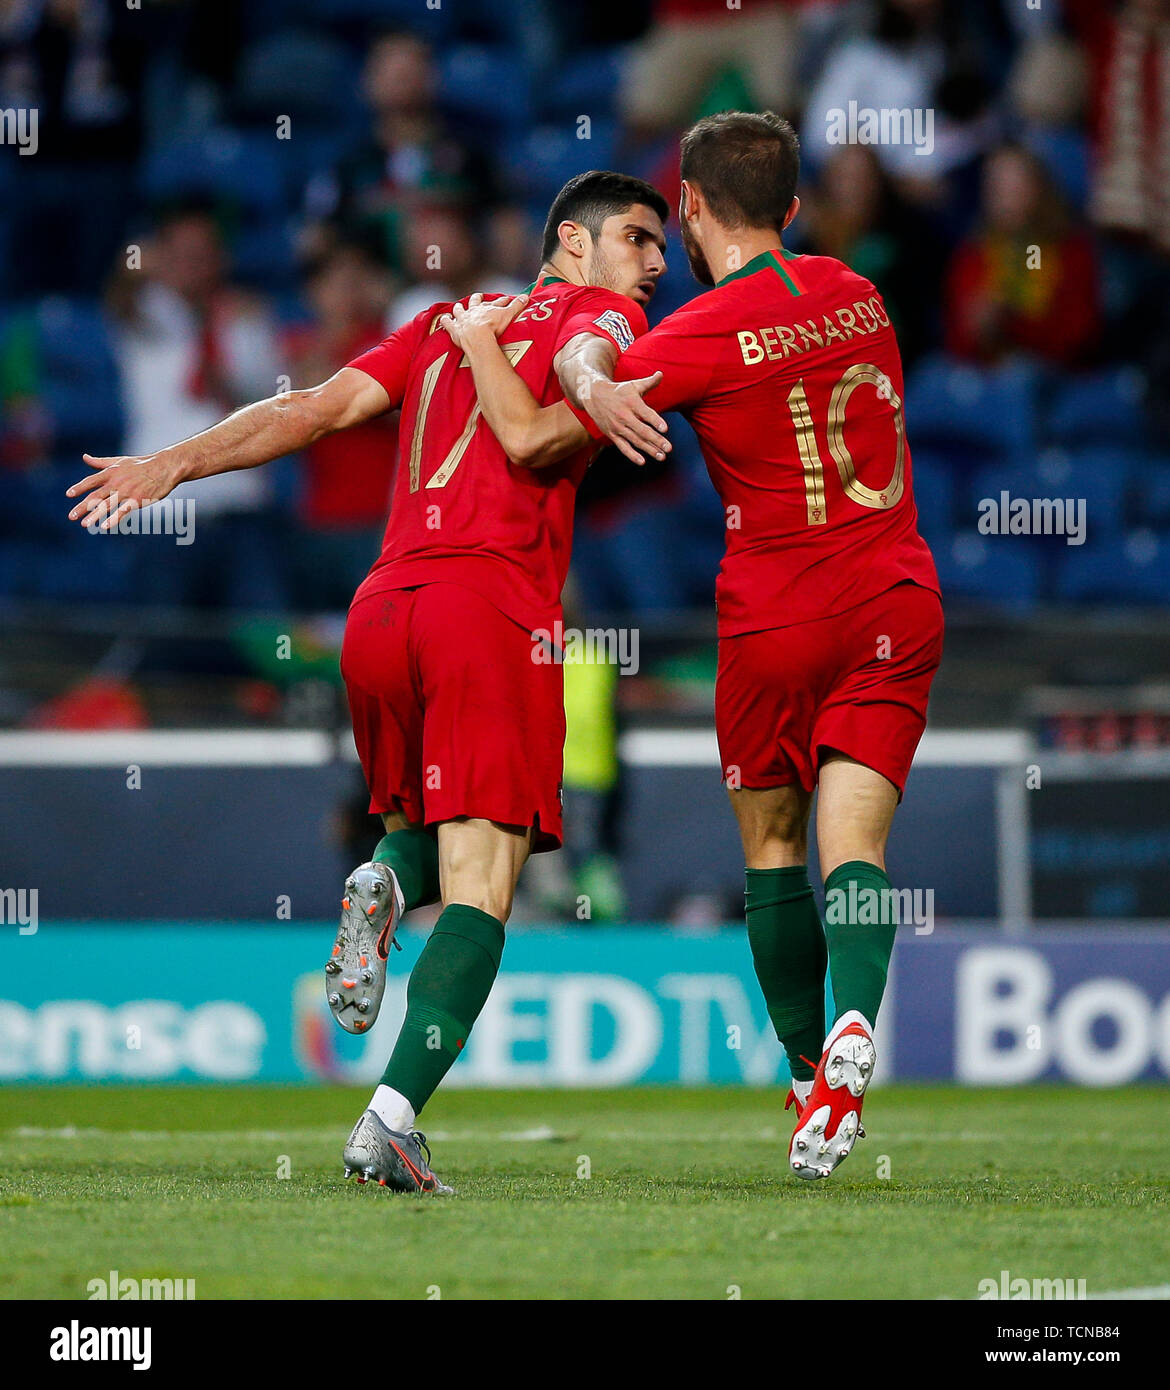 Porto, Portugal. 09th June, 2019. Goncalo Guedes of Portugal celebrates with Bernardo Silva of Portugal after scoring his side's first goal to make the score 1-0 during the UEFA Nations League Final match between Portugal and Netherlands at Estadio do Dragao on June 9th 2019 in Porto, Portugal. (Photo by Daniel Chesterton/phcimages.com) Credit: PHC Images/Alamy Live News Stock Photo